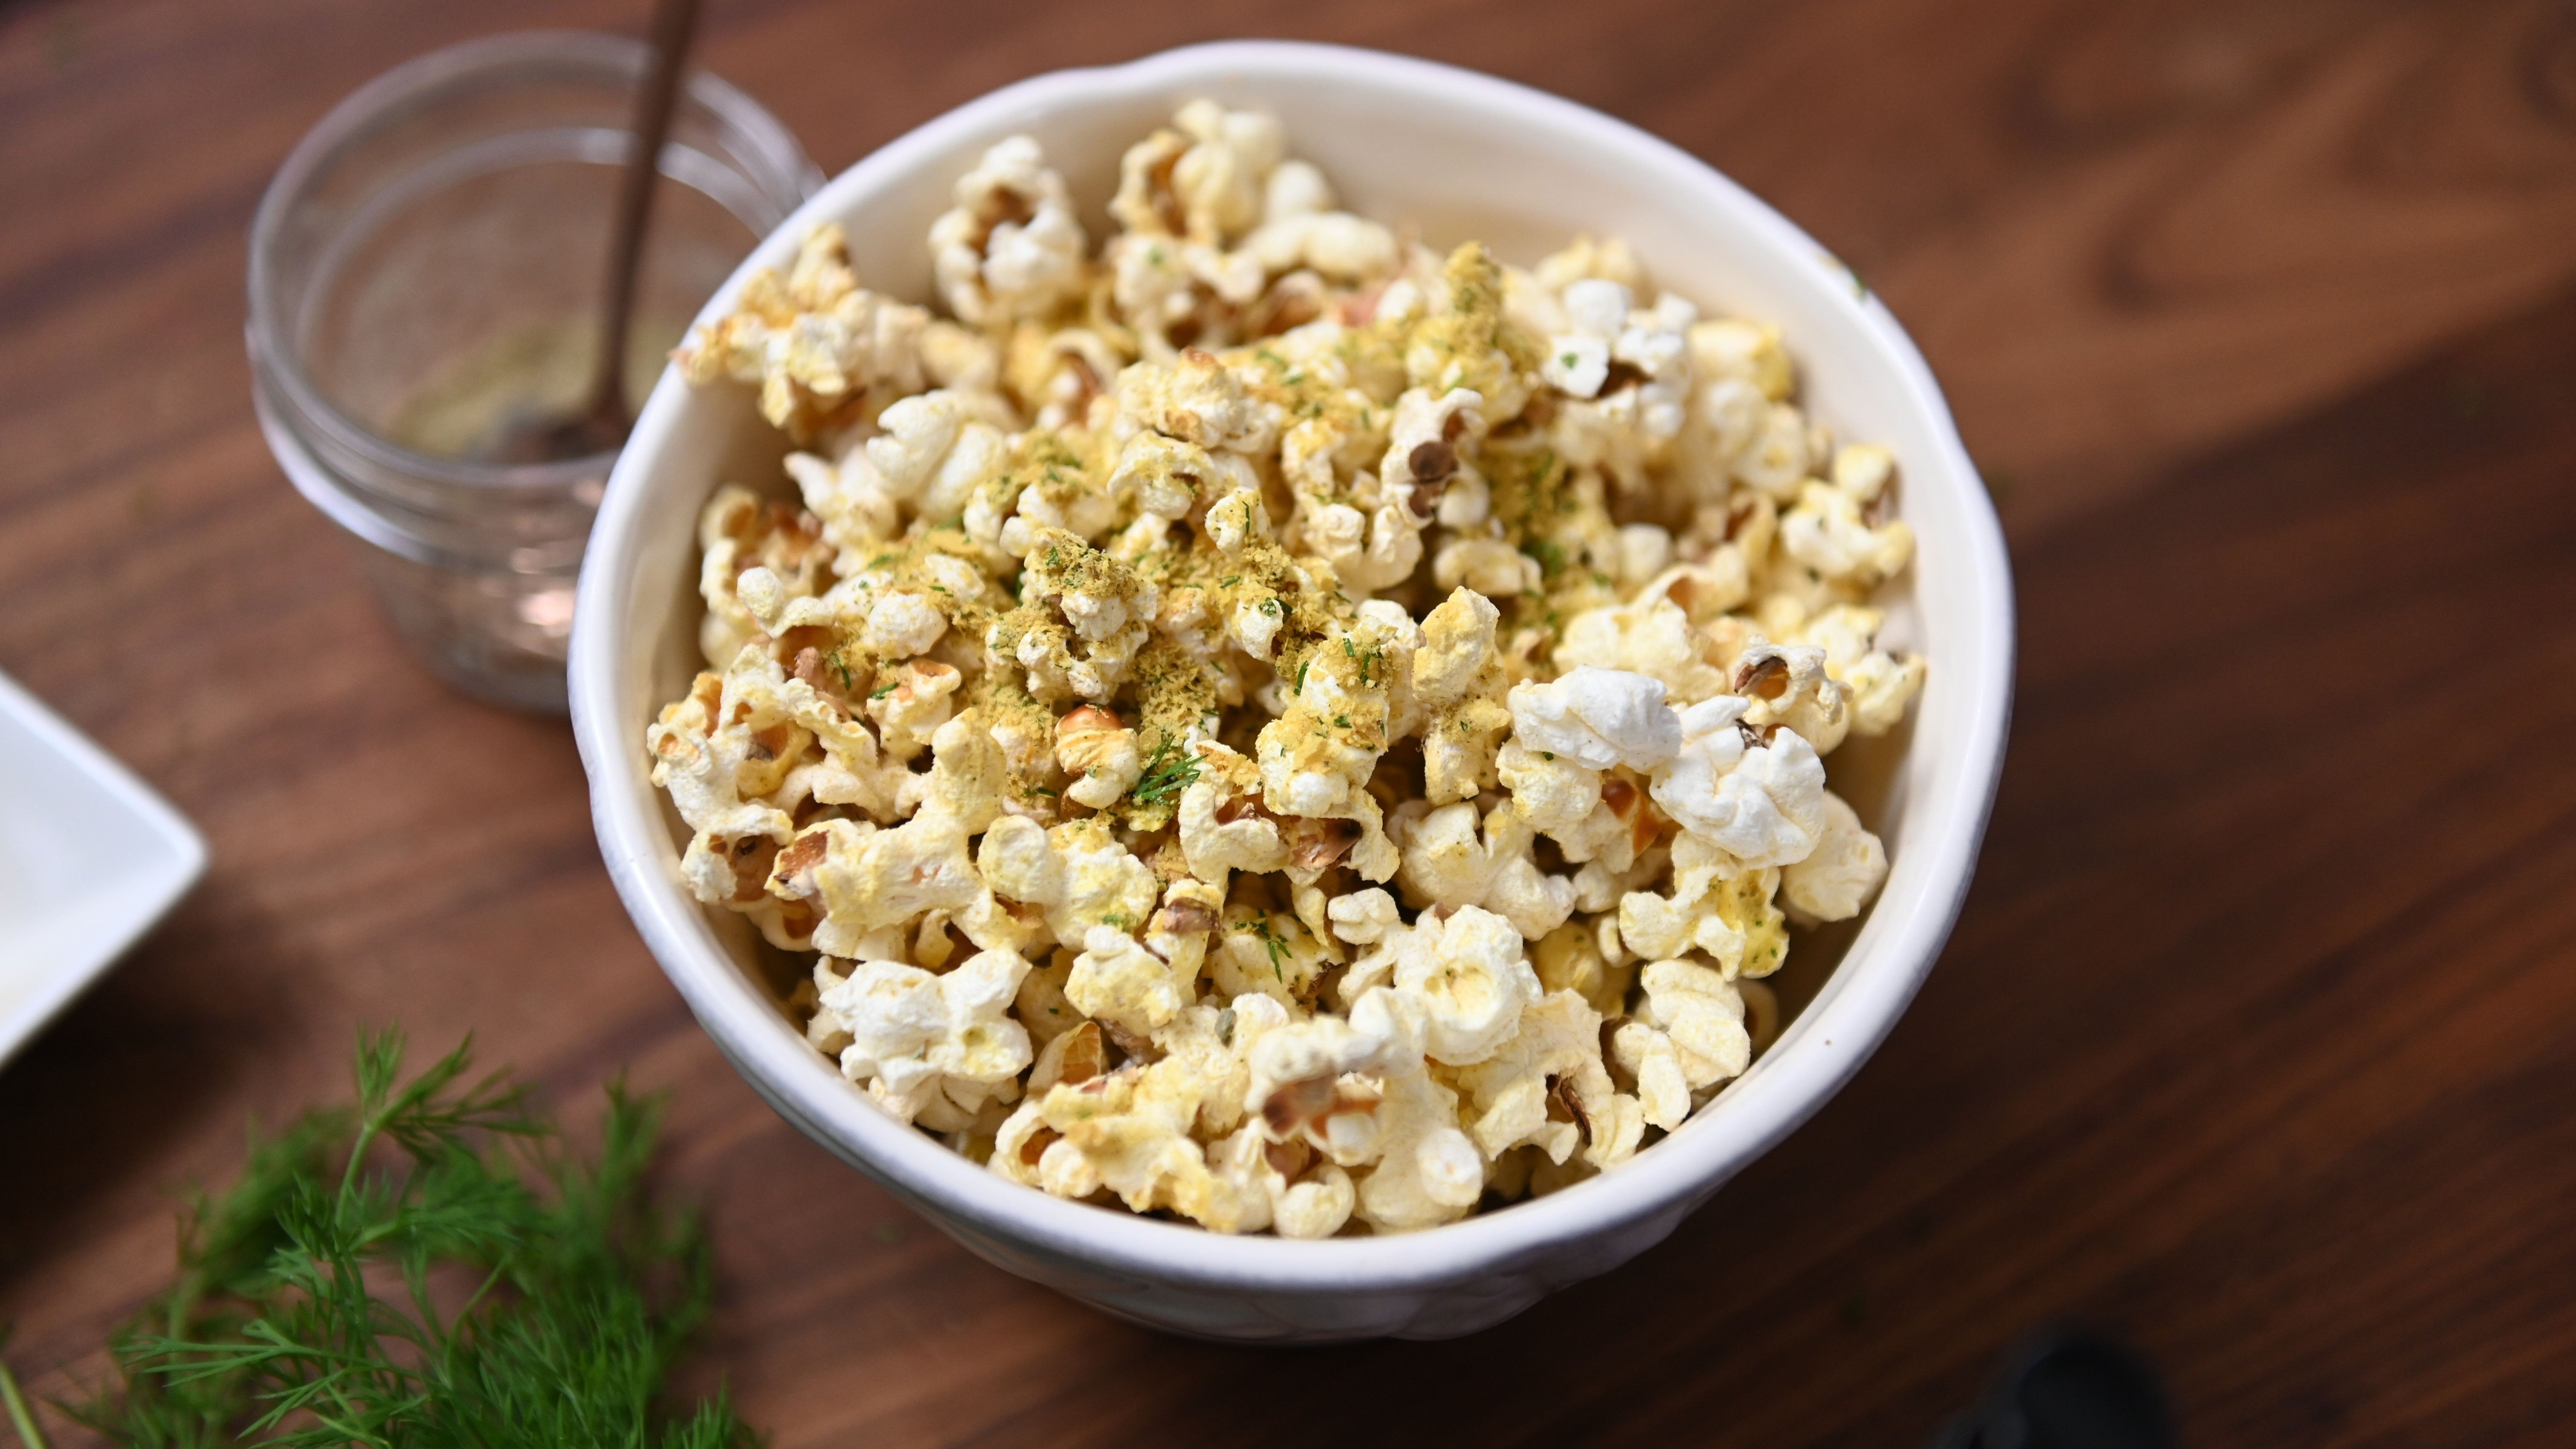 Popcorn flavored with pickle powder, dill, and nutritional yeast